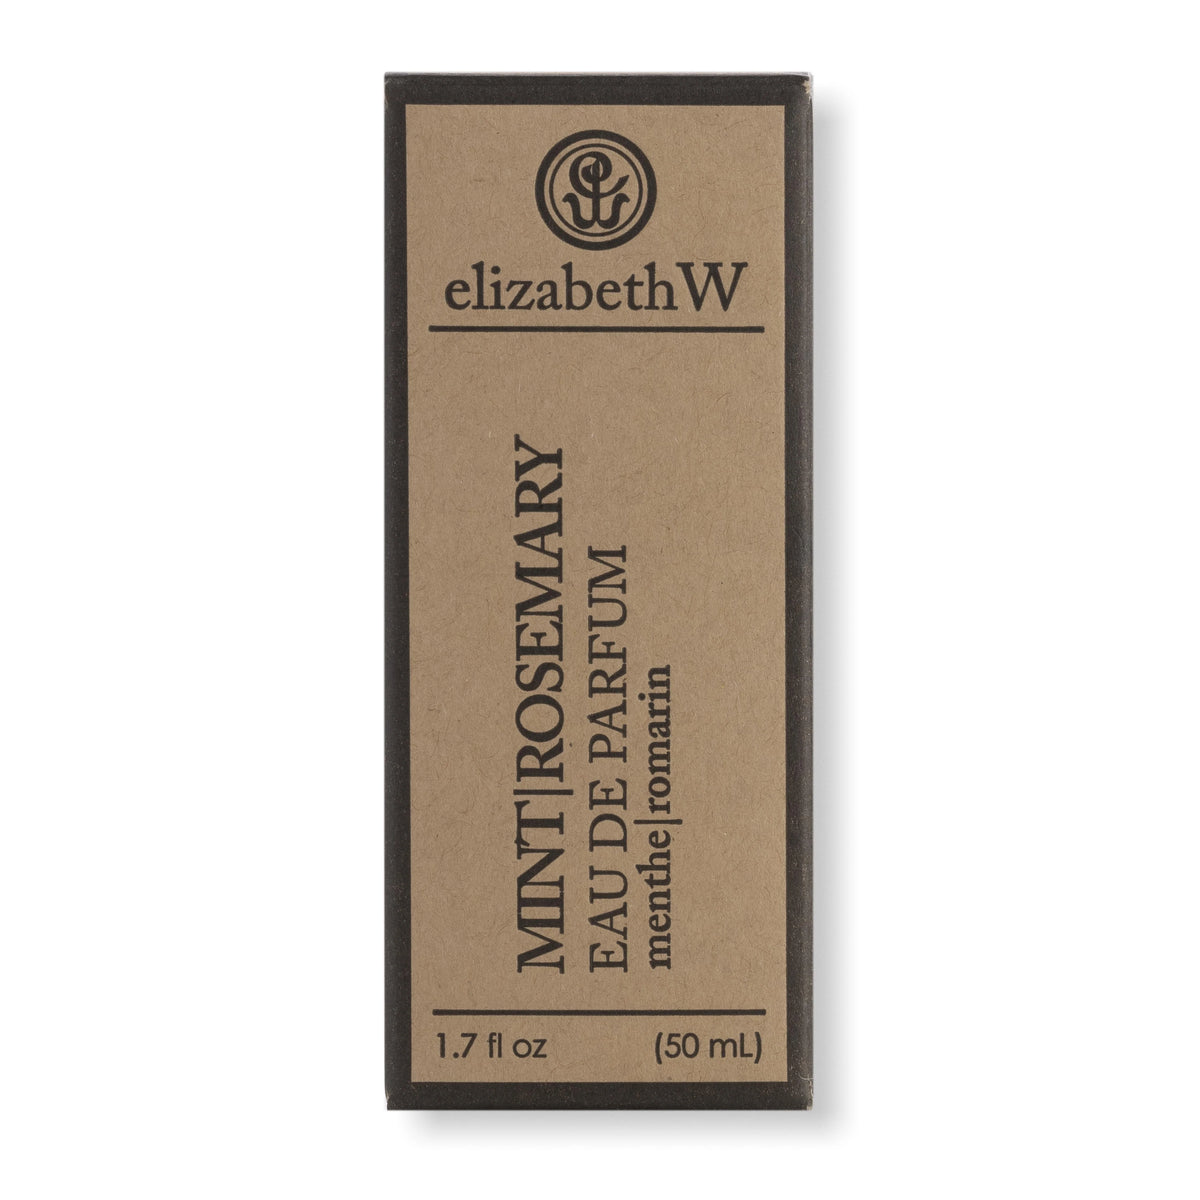 A rectangular box of Elizabeth W brand Purely Essential Mint Rosemary Eau de Parfum, 1.7 fl oz (50 ml), displayed on a light background. The packaging is primarily brown with